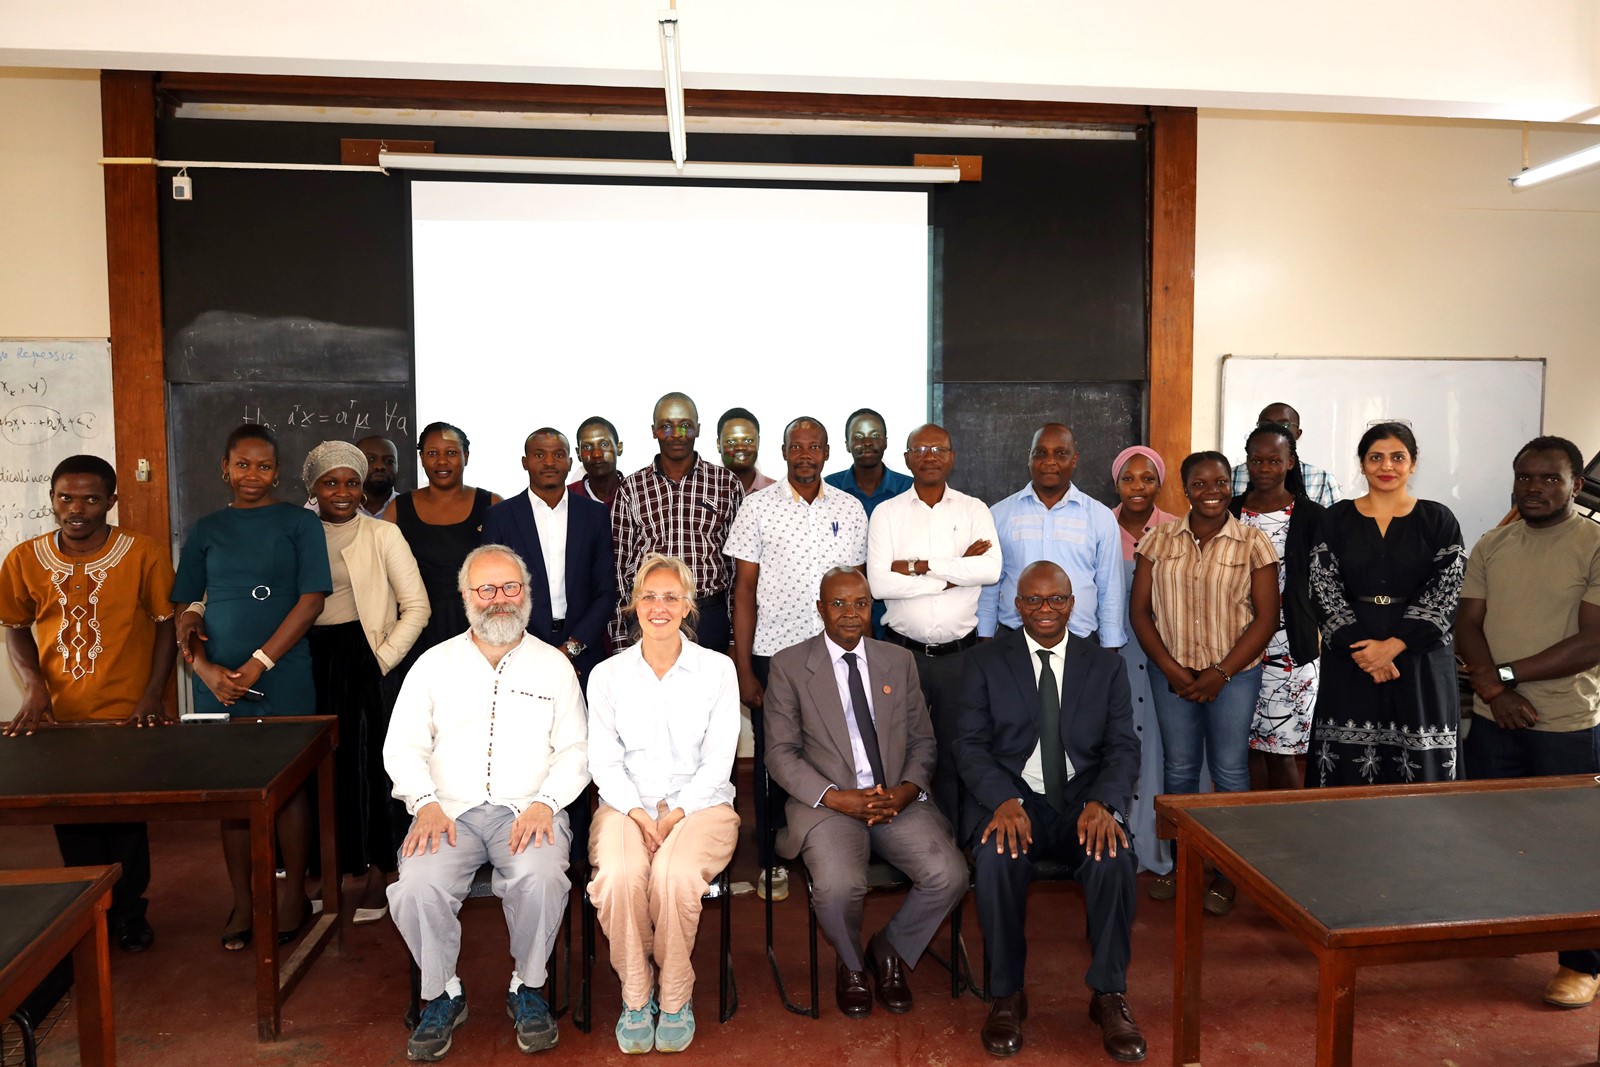 Group Photo of the trainers and trainees. Makerere University School of Statistics and Planning-University of Padova, Italy dynamic workshop on multivariate statistics and time series analysis, 11th to 20th June 2024, Makerere University, Kampala Uganda, East Africa.